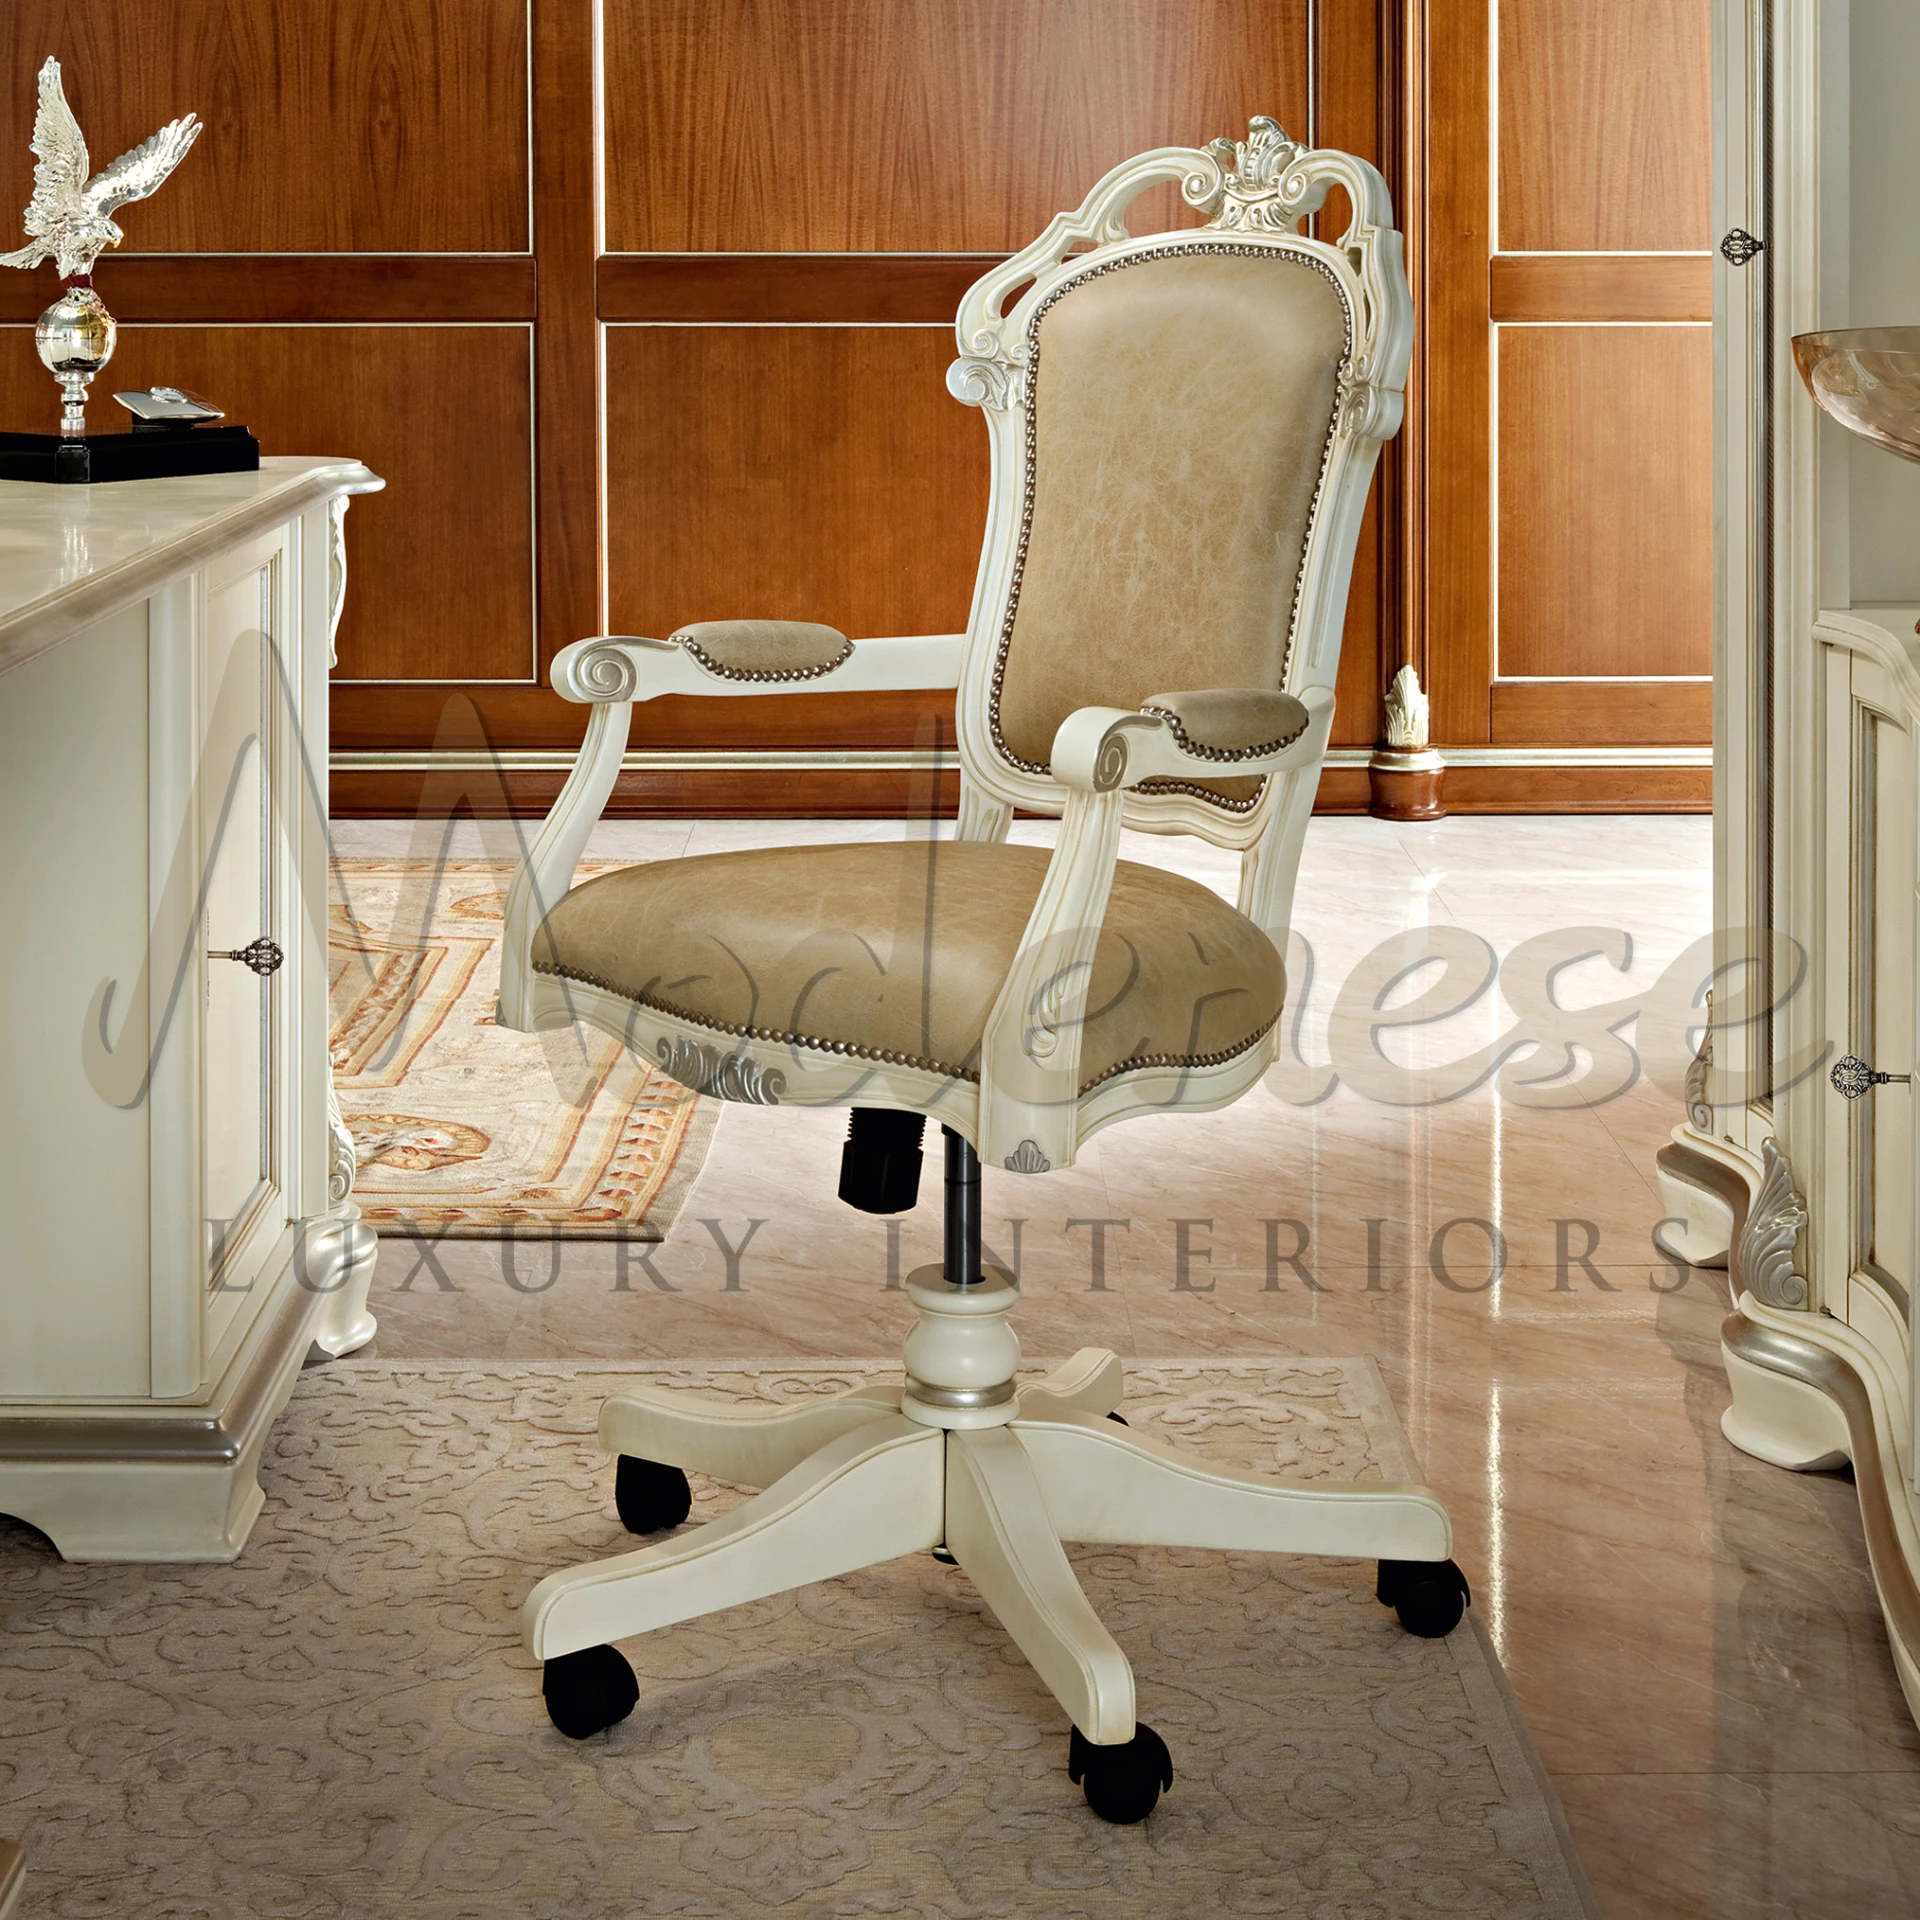 Realistic View in Workspace - Imperial Office Armchair with sturdy wood structure